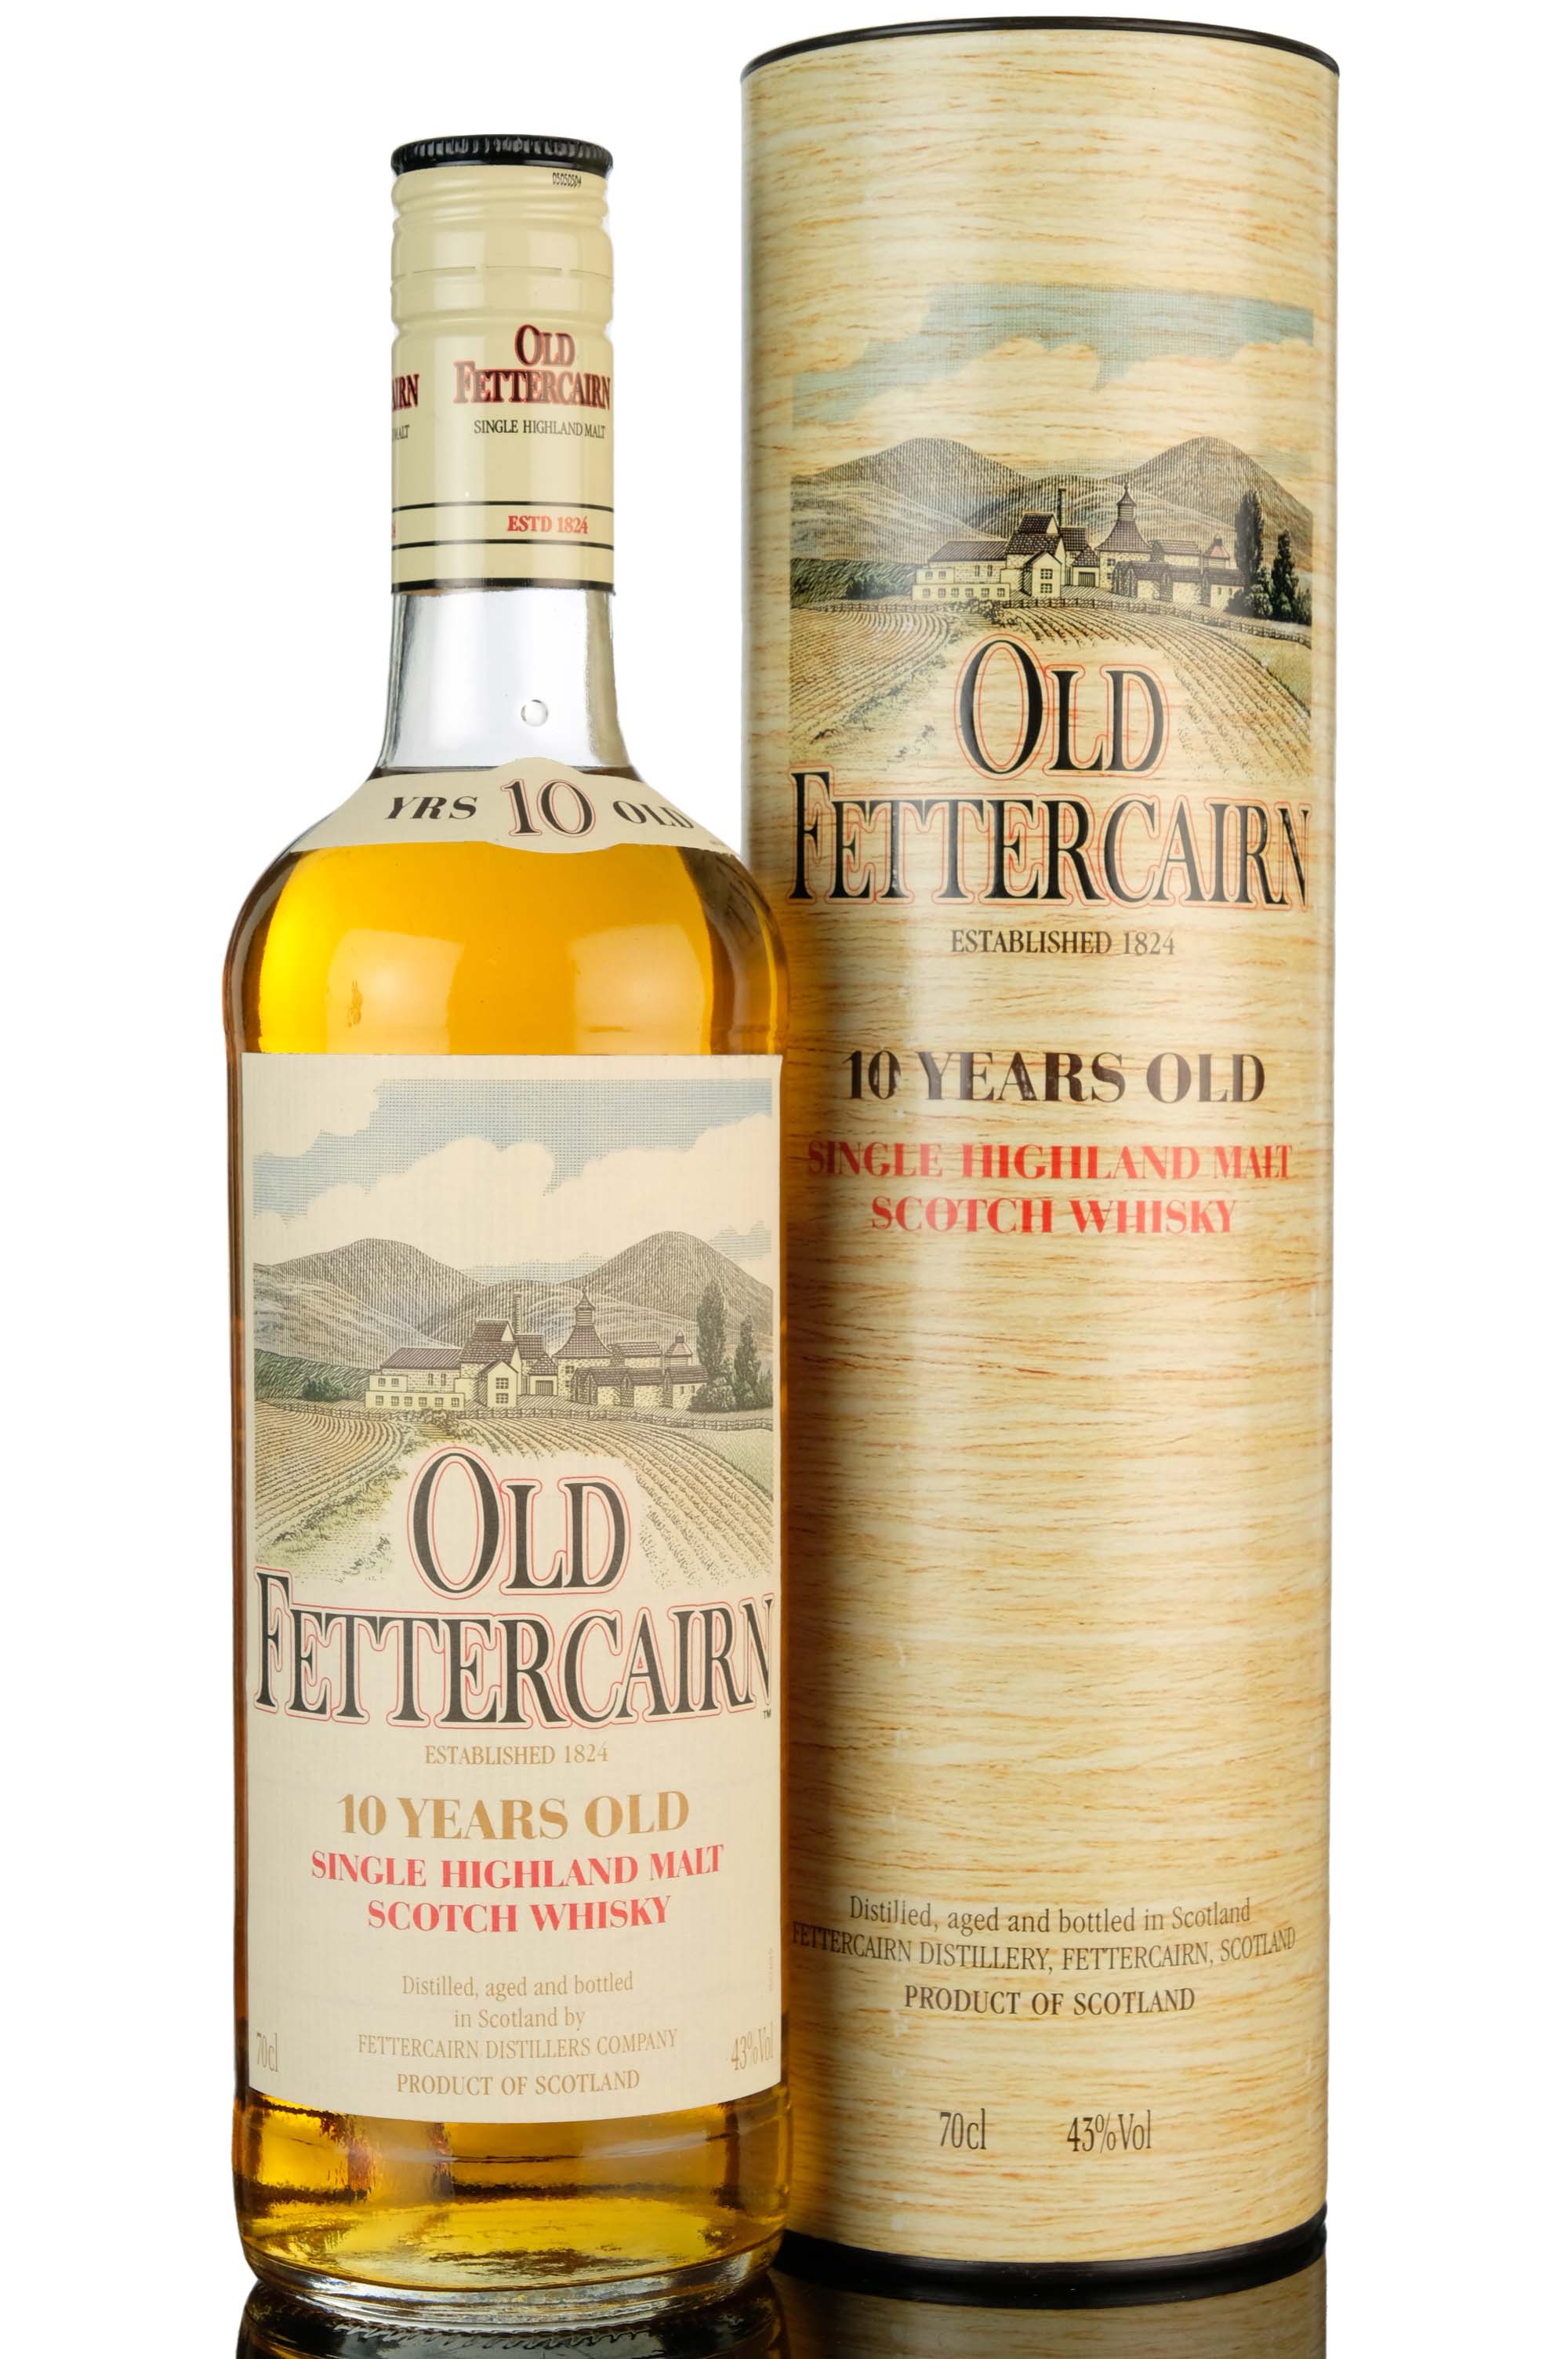 Old Fettercairn 10 Year Old - 1990s